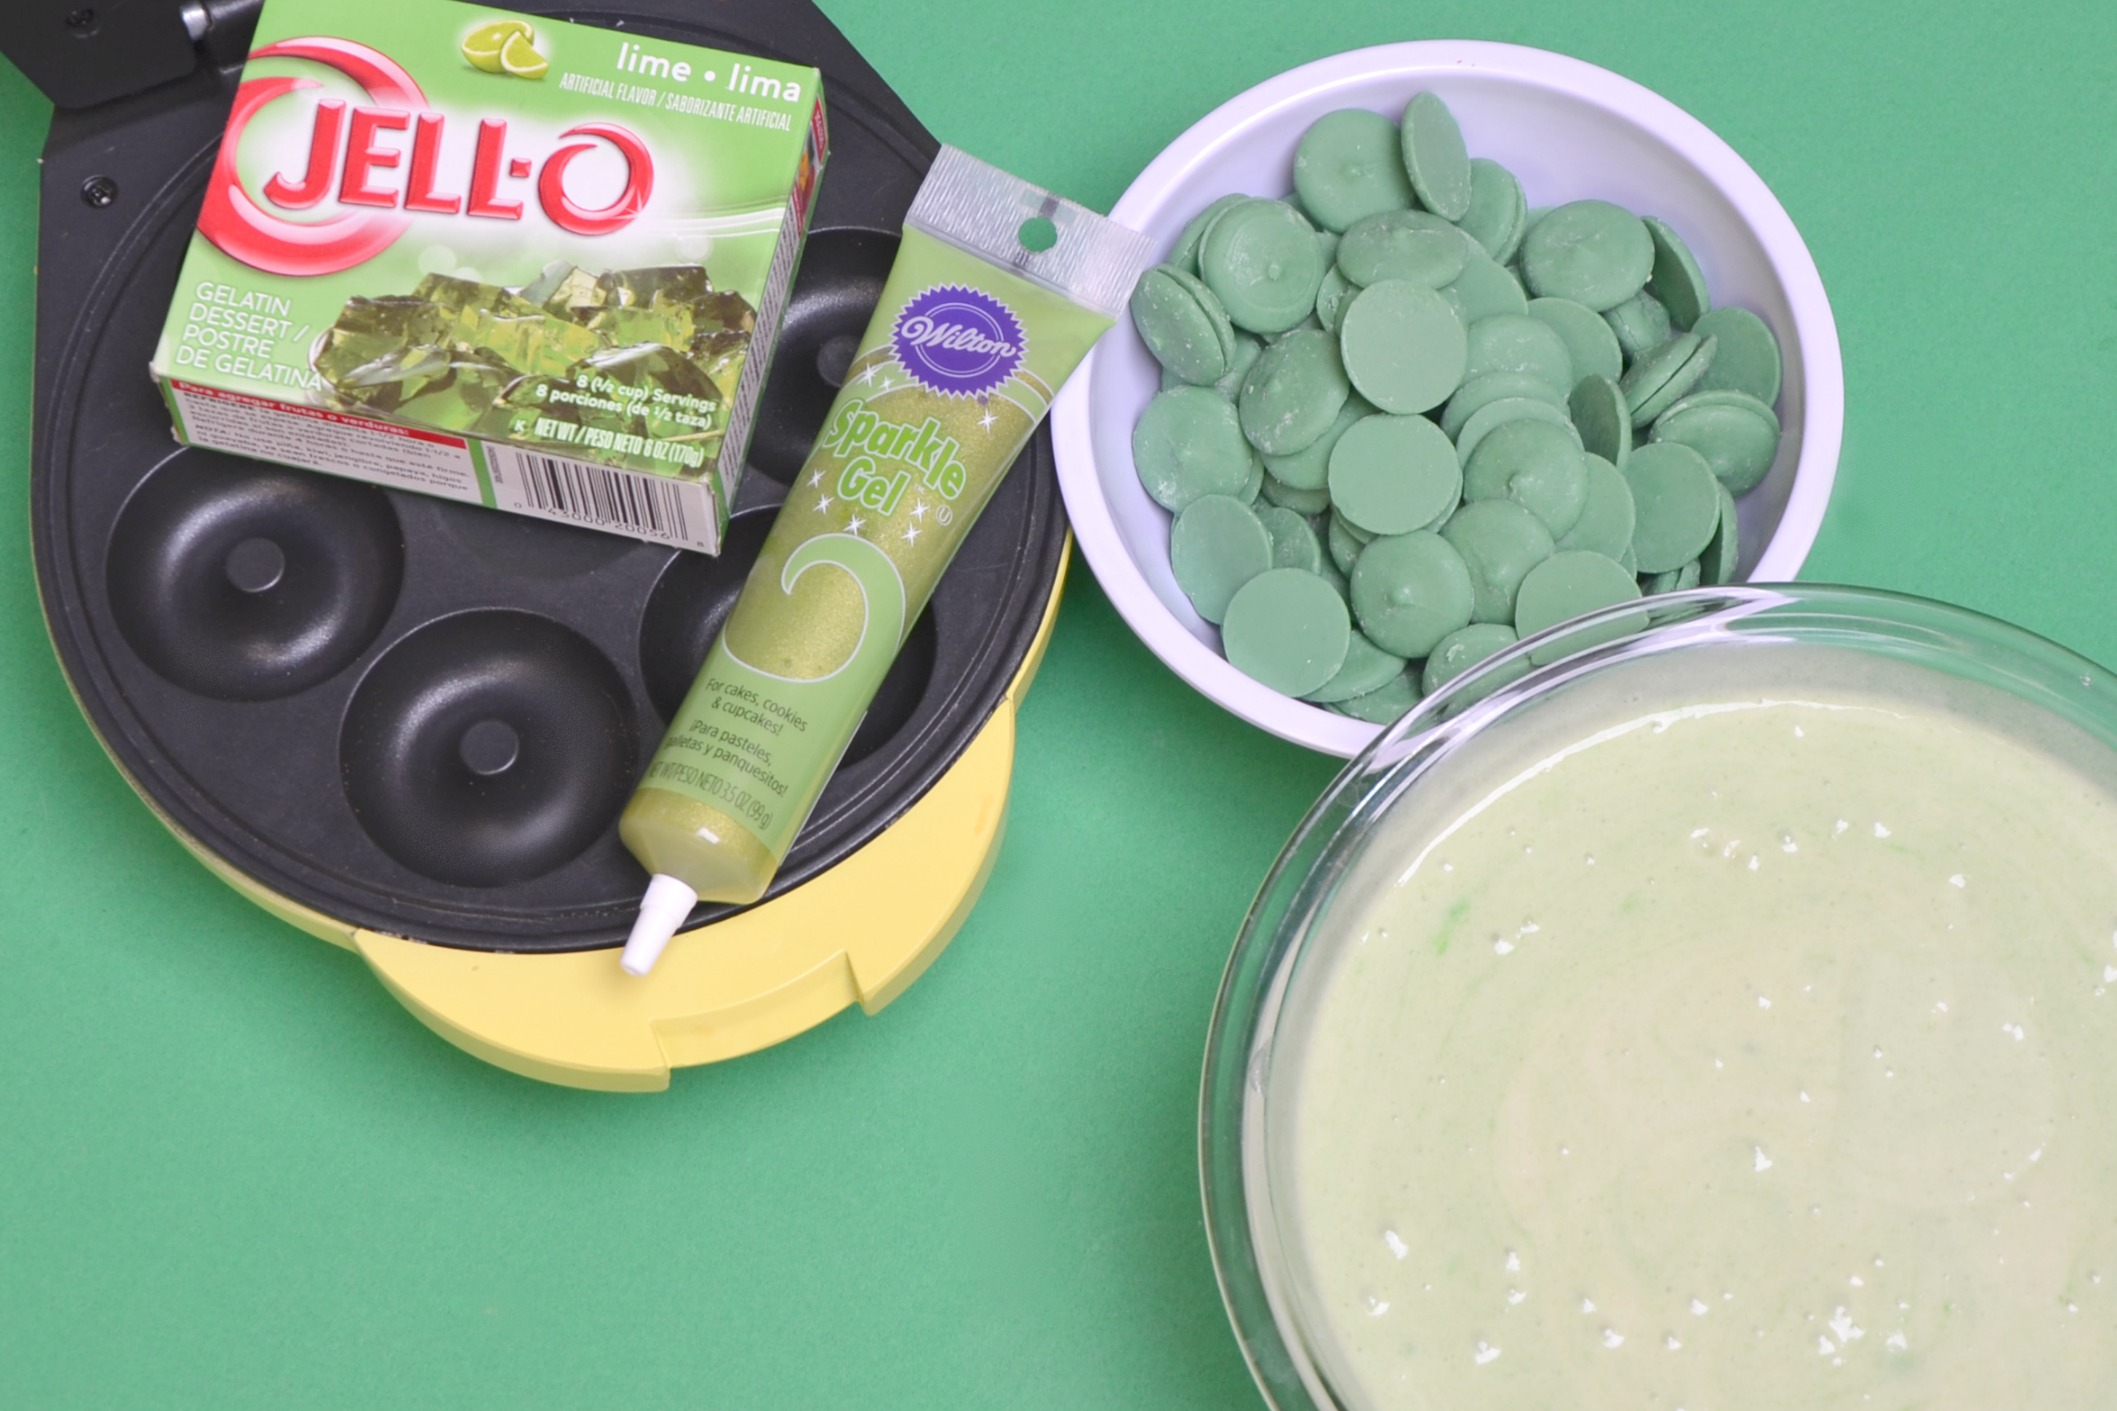 JELL-O Zombie Donuts ingredients